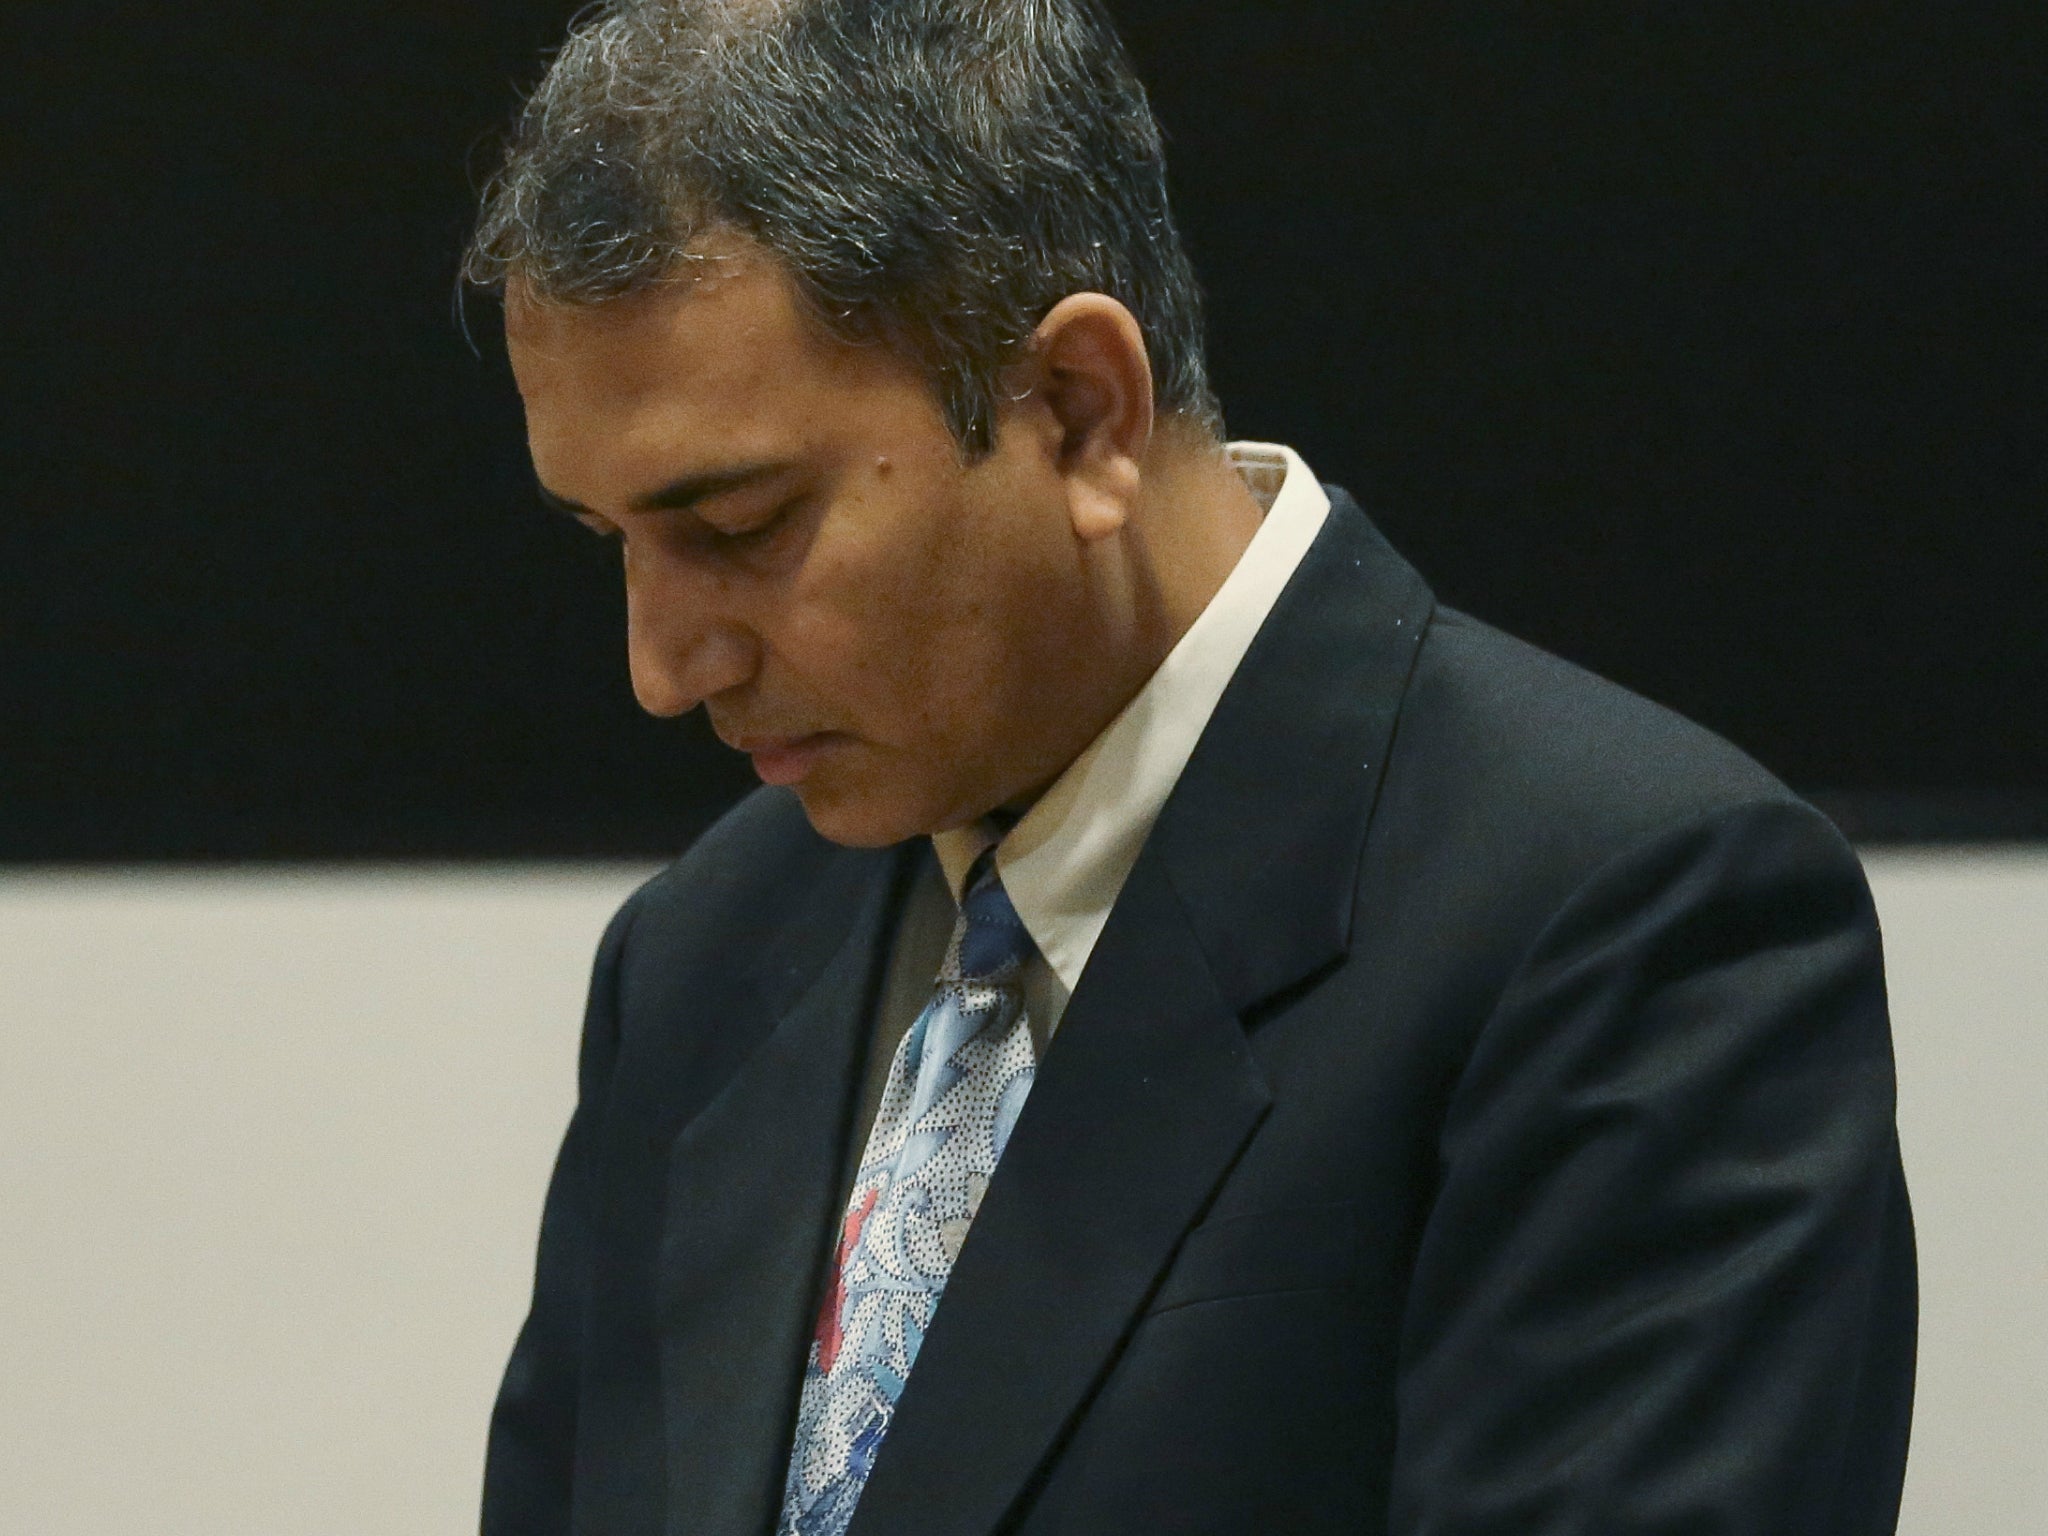 Former physician Shafeeq Sheikh awaits his sentencing at Harris County Family Law Center in Houston for the 2013 rape of a patient